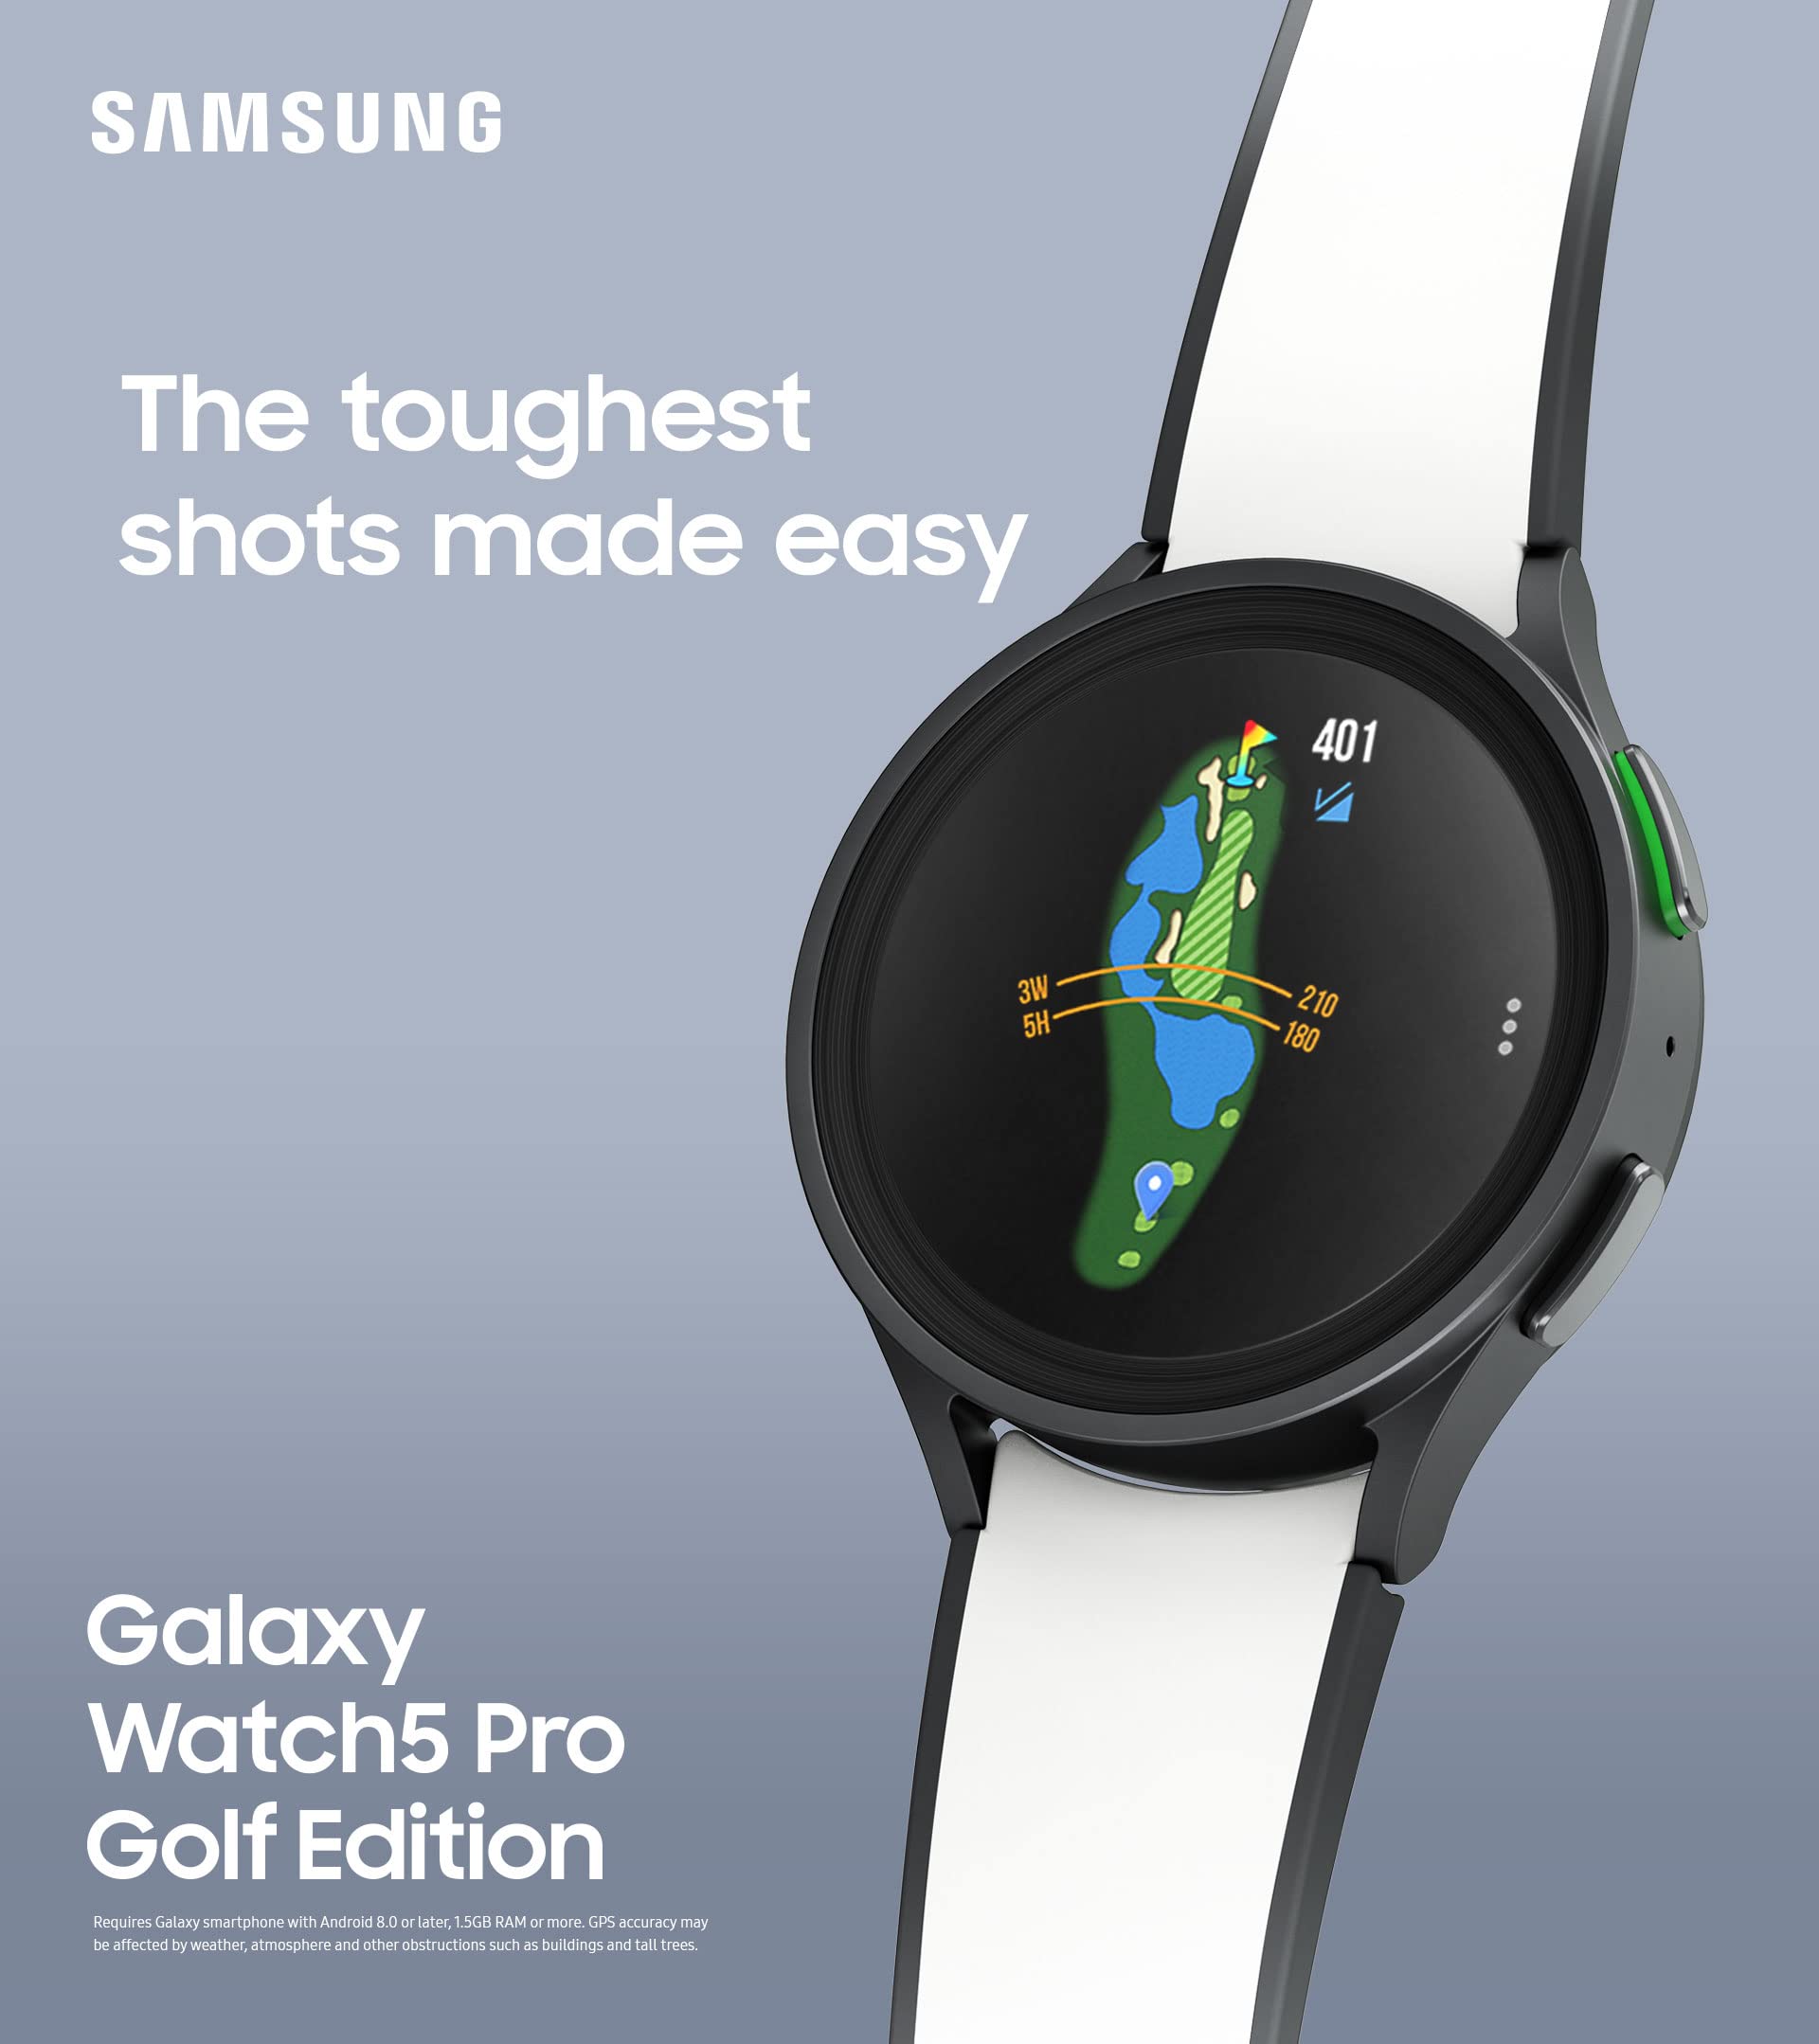 SAMSUNG Galaxy Watch 5 Pro Golf Edition, 45mm Bluetooth Smartwatch w/ Body, Health, Fitness and Sleep Tracker, Improved Battery, Enhanced GPS Tracking, US Version, Black Bezel w/Two-Tone Band